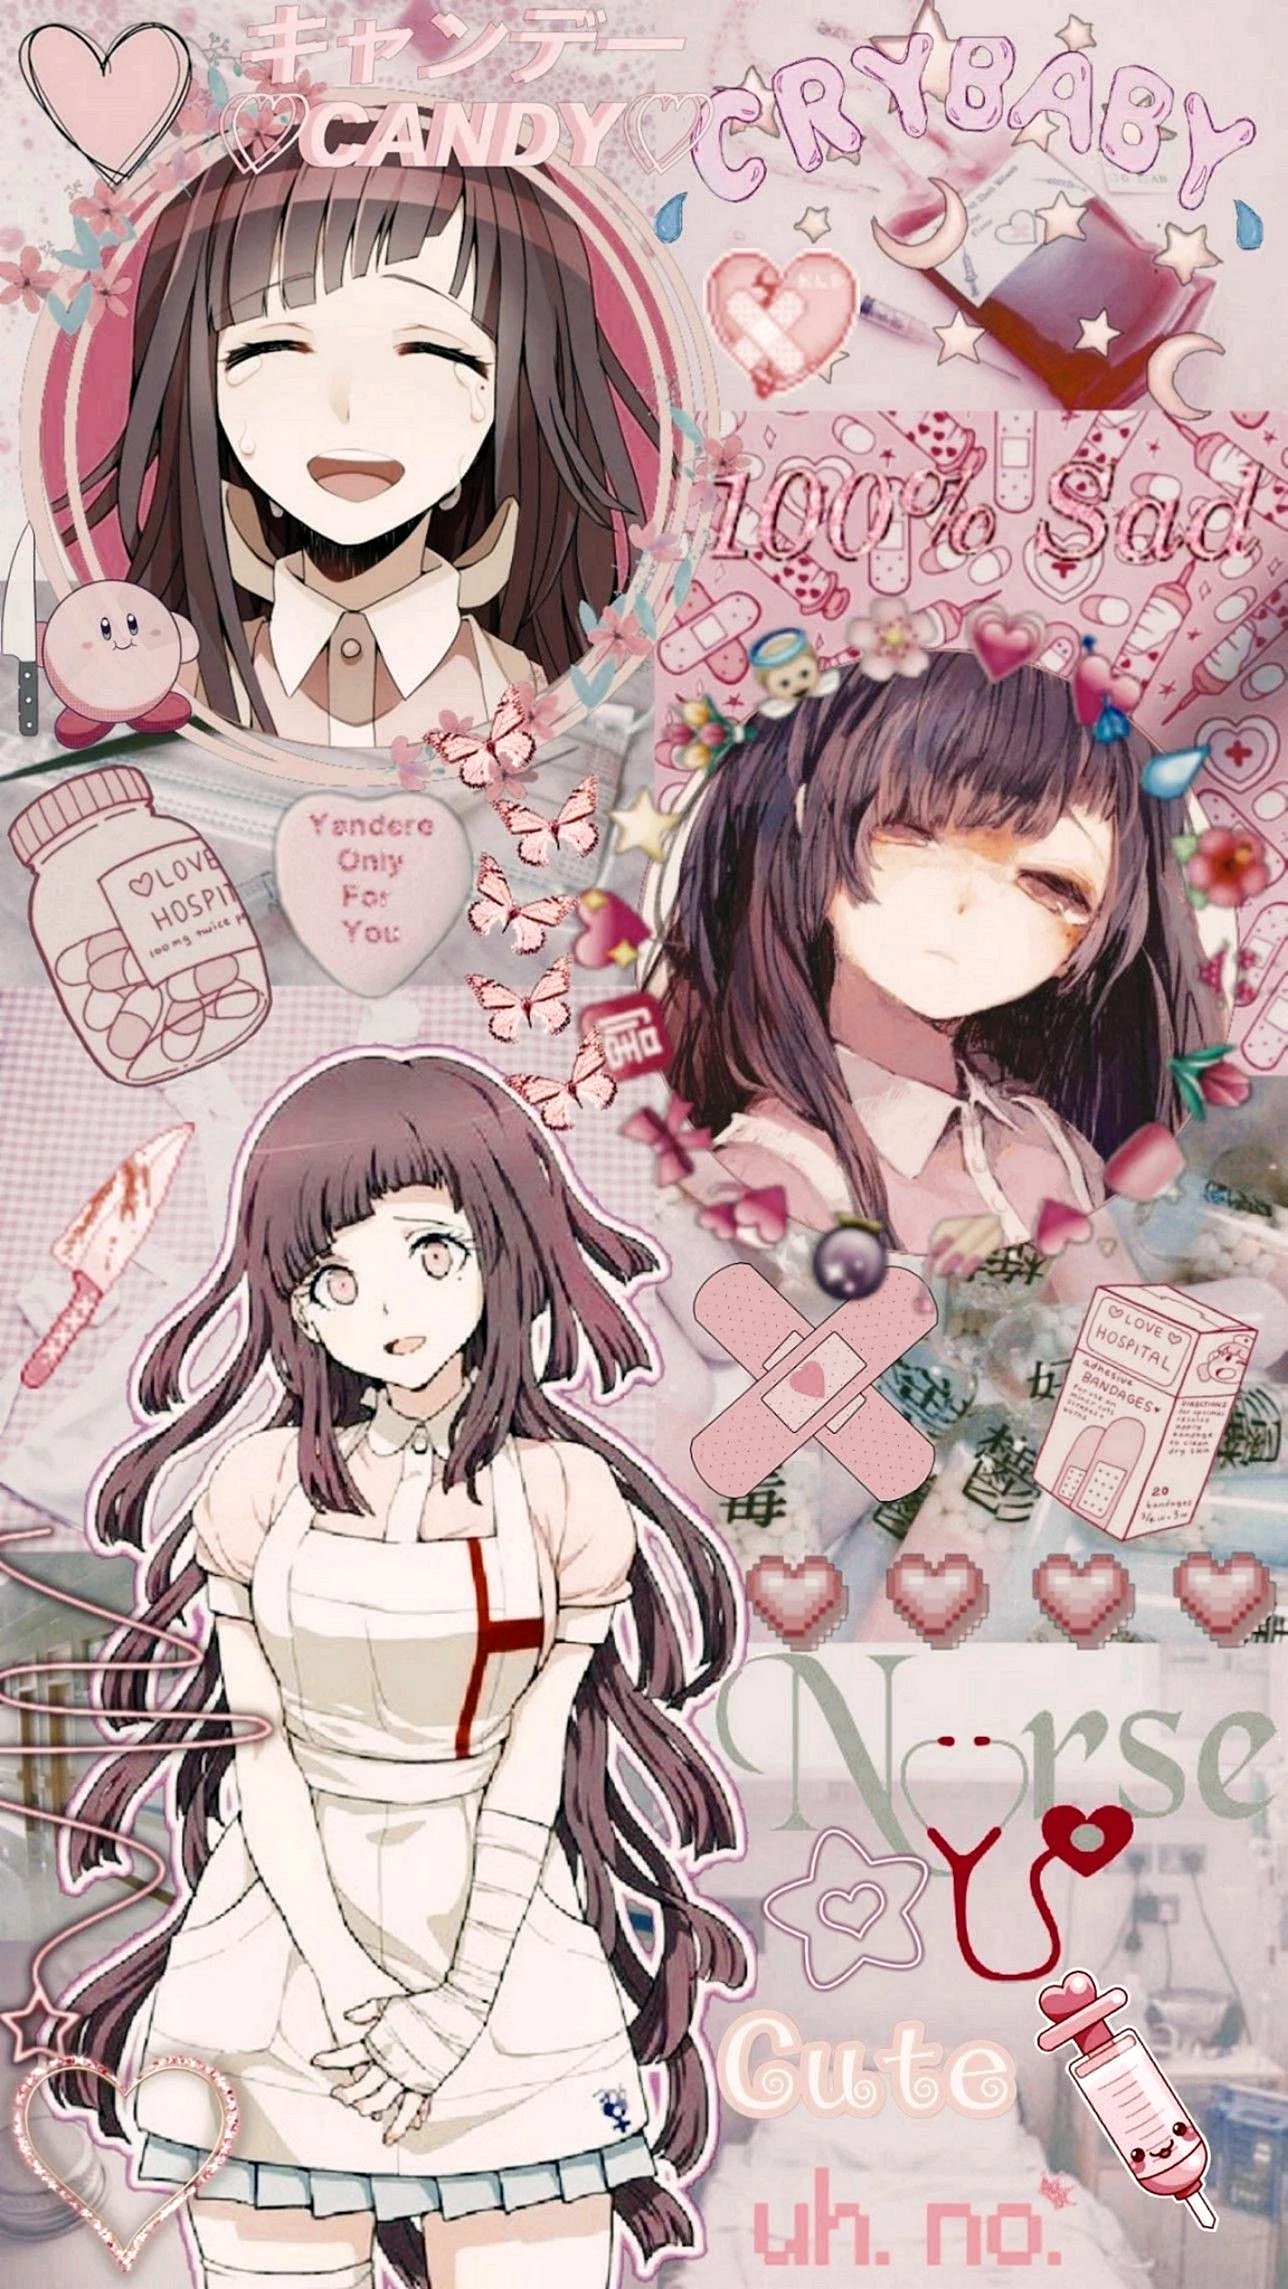 Mikan Tsumiki Aesthetic Wallpaper For iPhone